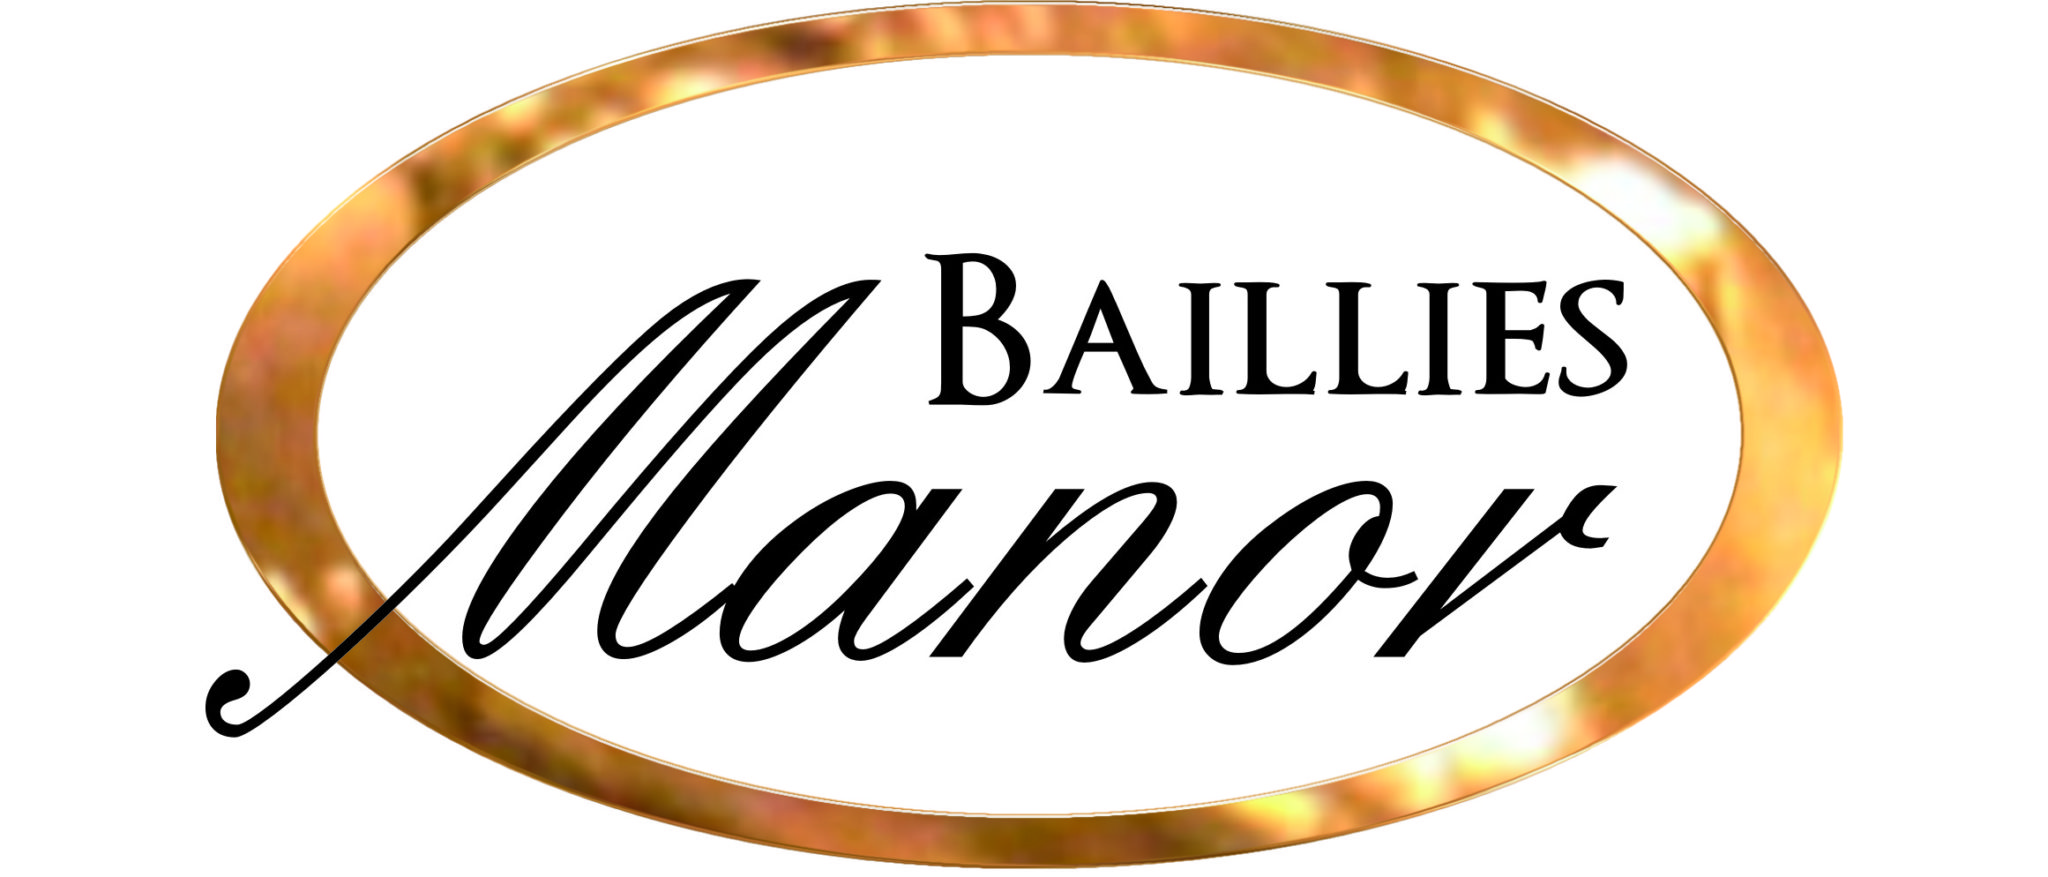                 Baillie’s Manor Guest House is an established hospitality landmark in Potchefstroom that offers convenience and comfort like no other. We specialise in hosting business tourists, as well as international athletes looking for affordable luxury accommodation in Potchefstroom.  If you are looking for a little serenity close to popular venues in Potchefstroom, come and book in at Baillie’s Manor Guest House – you may never want to leave!

Some our our facilities include:

    Swimming Pool
    Lunch & dinner on request (Banting option available)
    Wi-Fi Hotspot
    Gym
    Labyrinth
    Access Controlled Parking
              